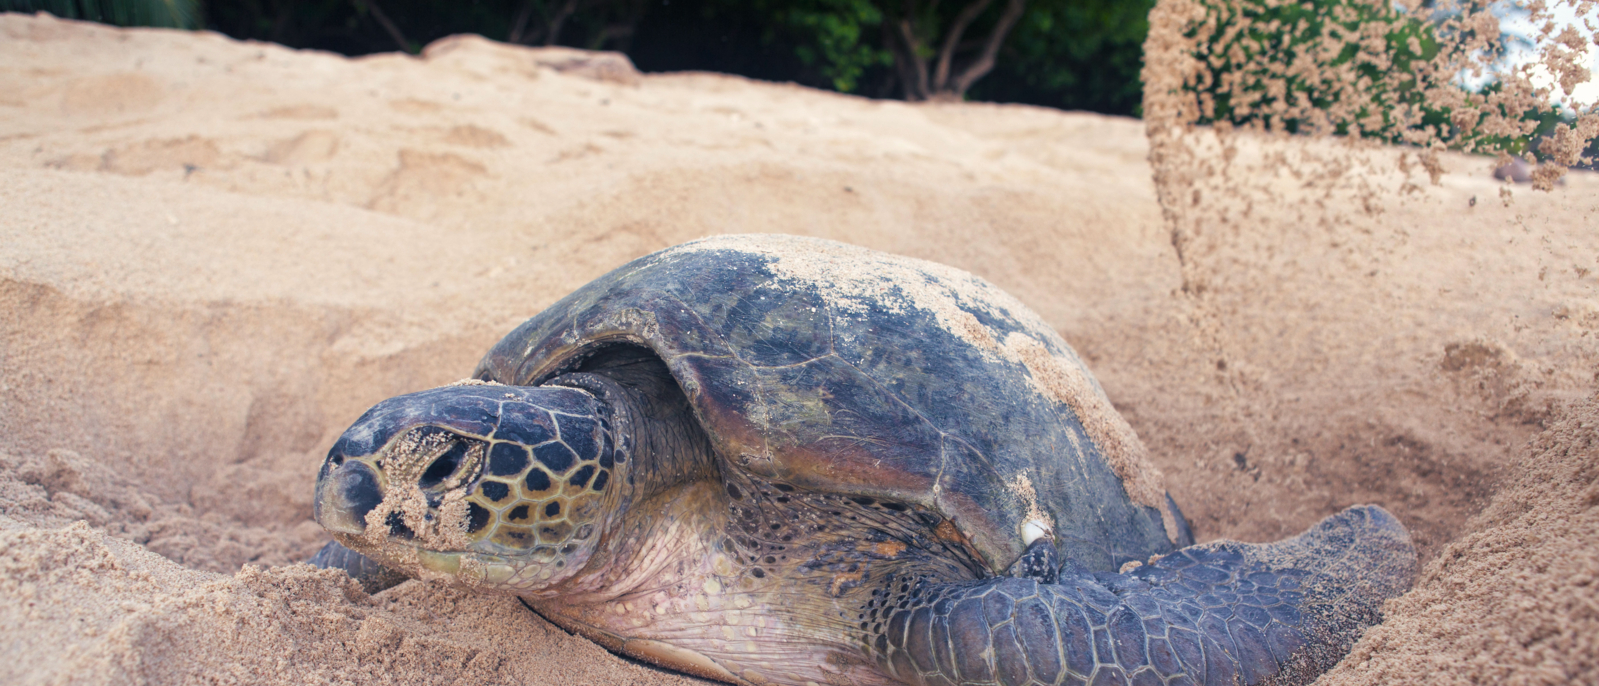 Green turtle (Chelonia mydas) laying her eggs and covering her nest on the beach in the daytime